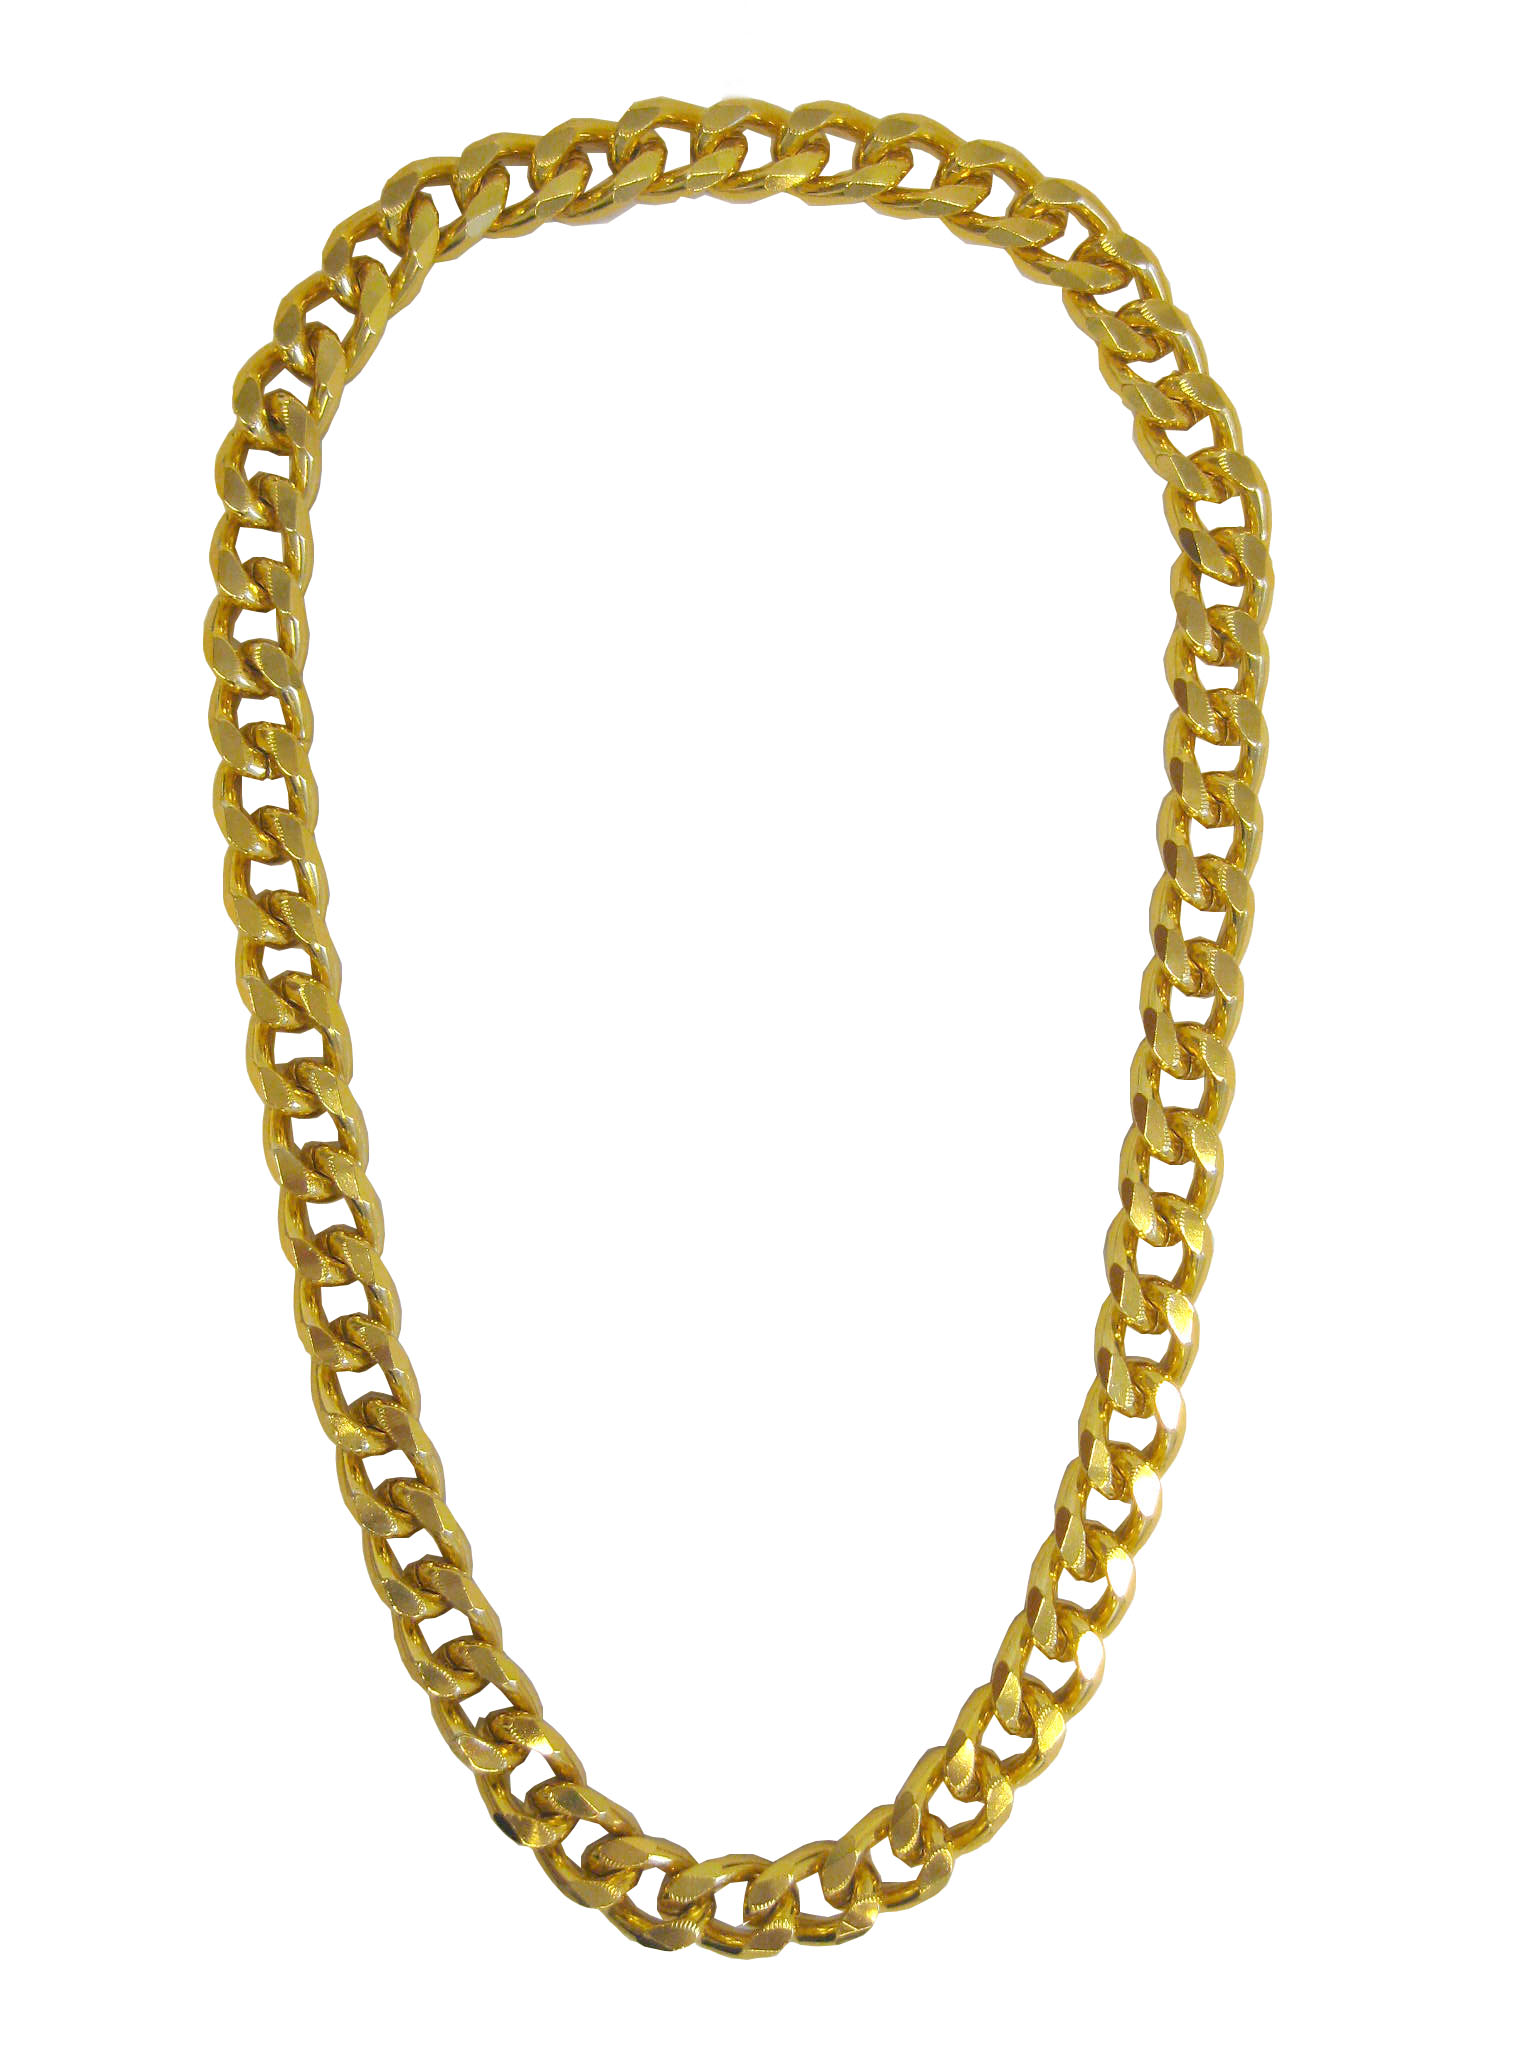 Chain Necklace Bling-bling Jewellery Amazon.com, Thug Life Gold Chain, gold-colored  dollar pendant necklace, pendant, fashion, costume Jewelry png | PNGWing